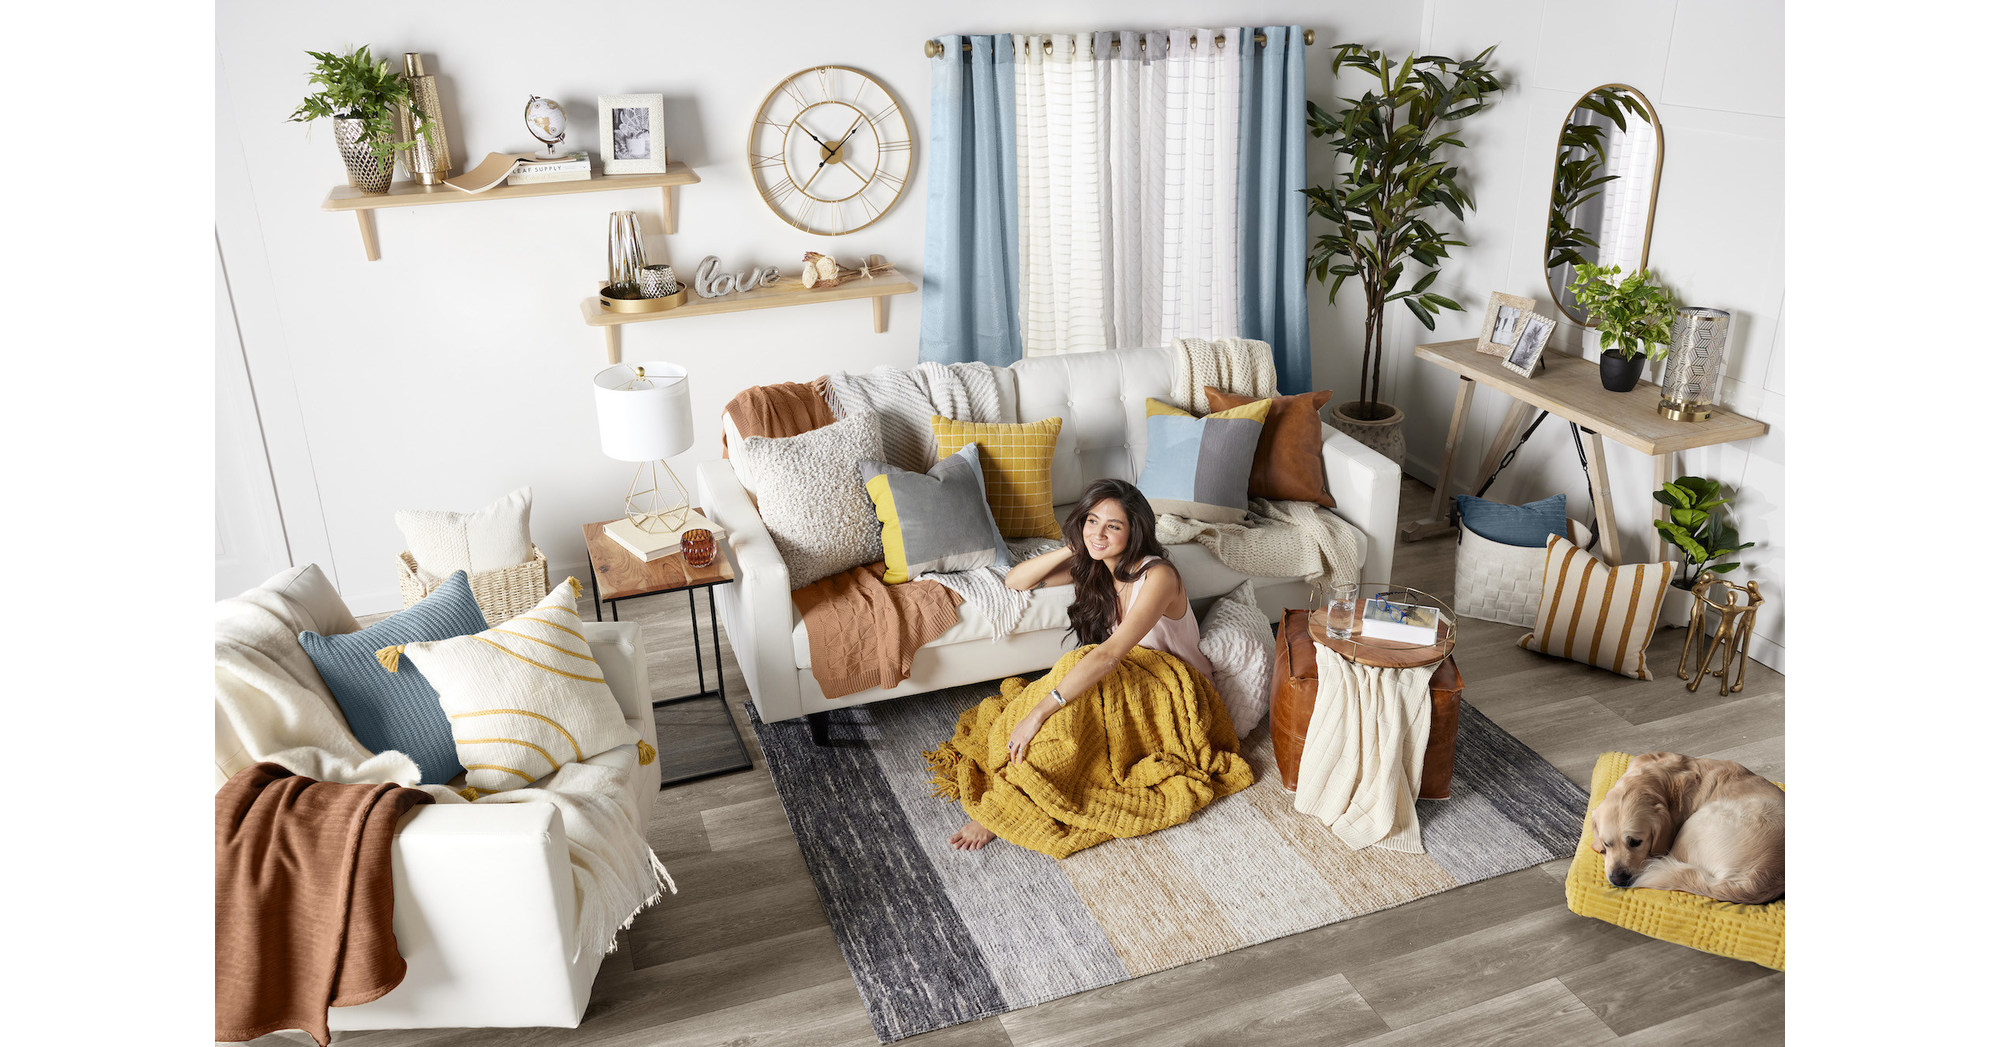 VCNY Home Introduces jade + oake Brand to Bring On-trend Décor Home for Young Adults